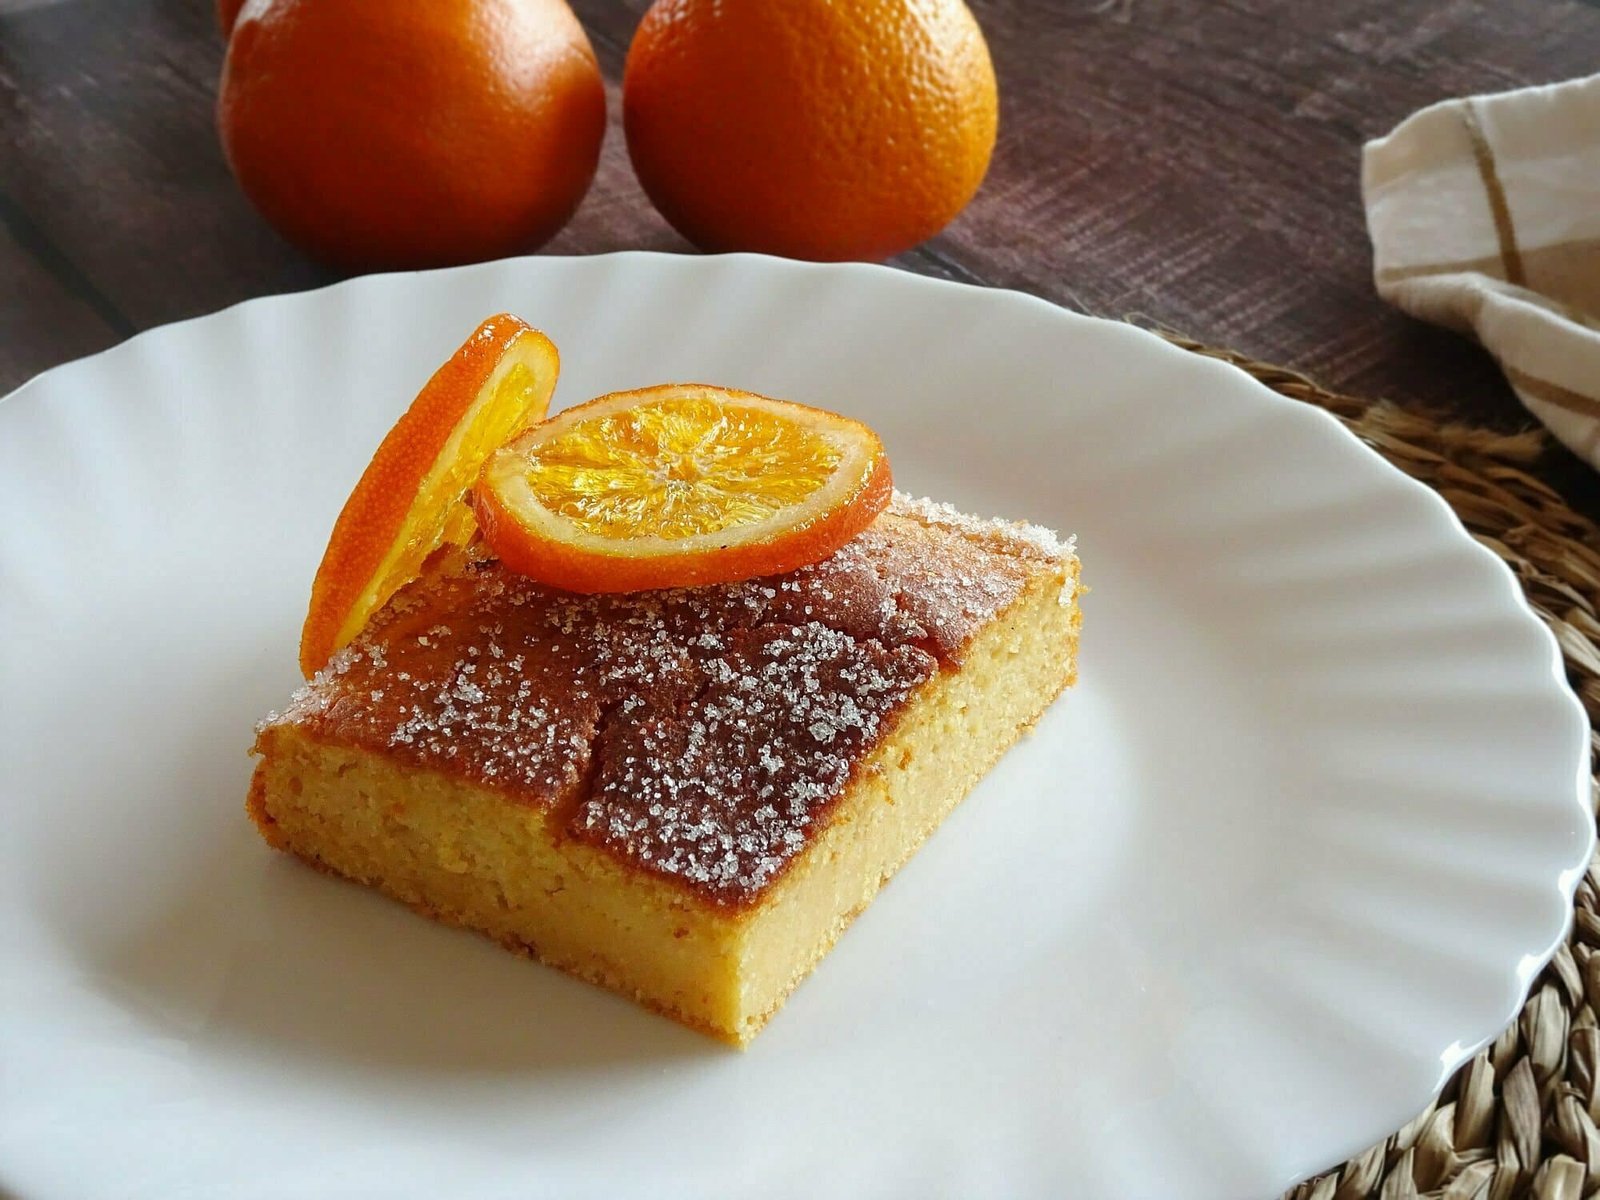 A slice of orange and grapefruit cake sits on a white plate and is garnished with a slice of candied orange